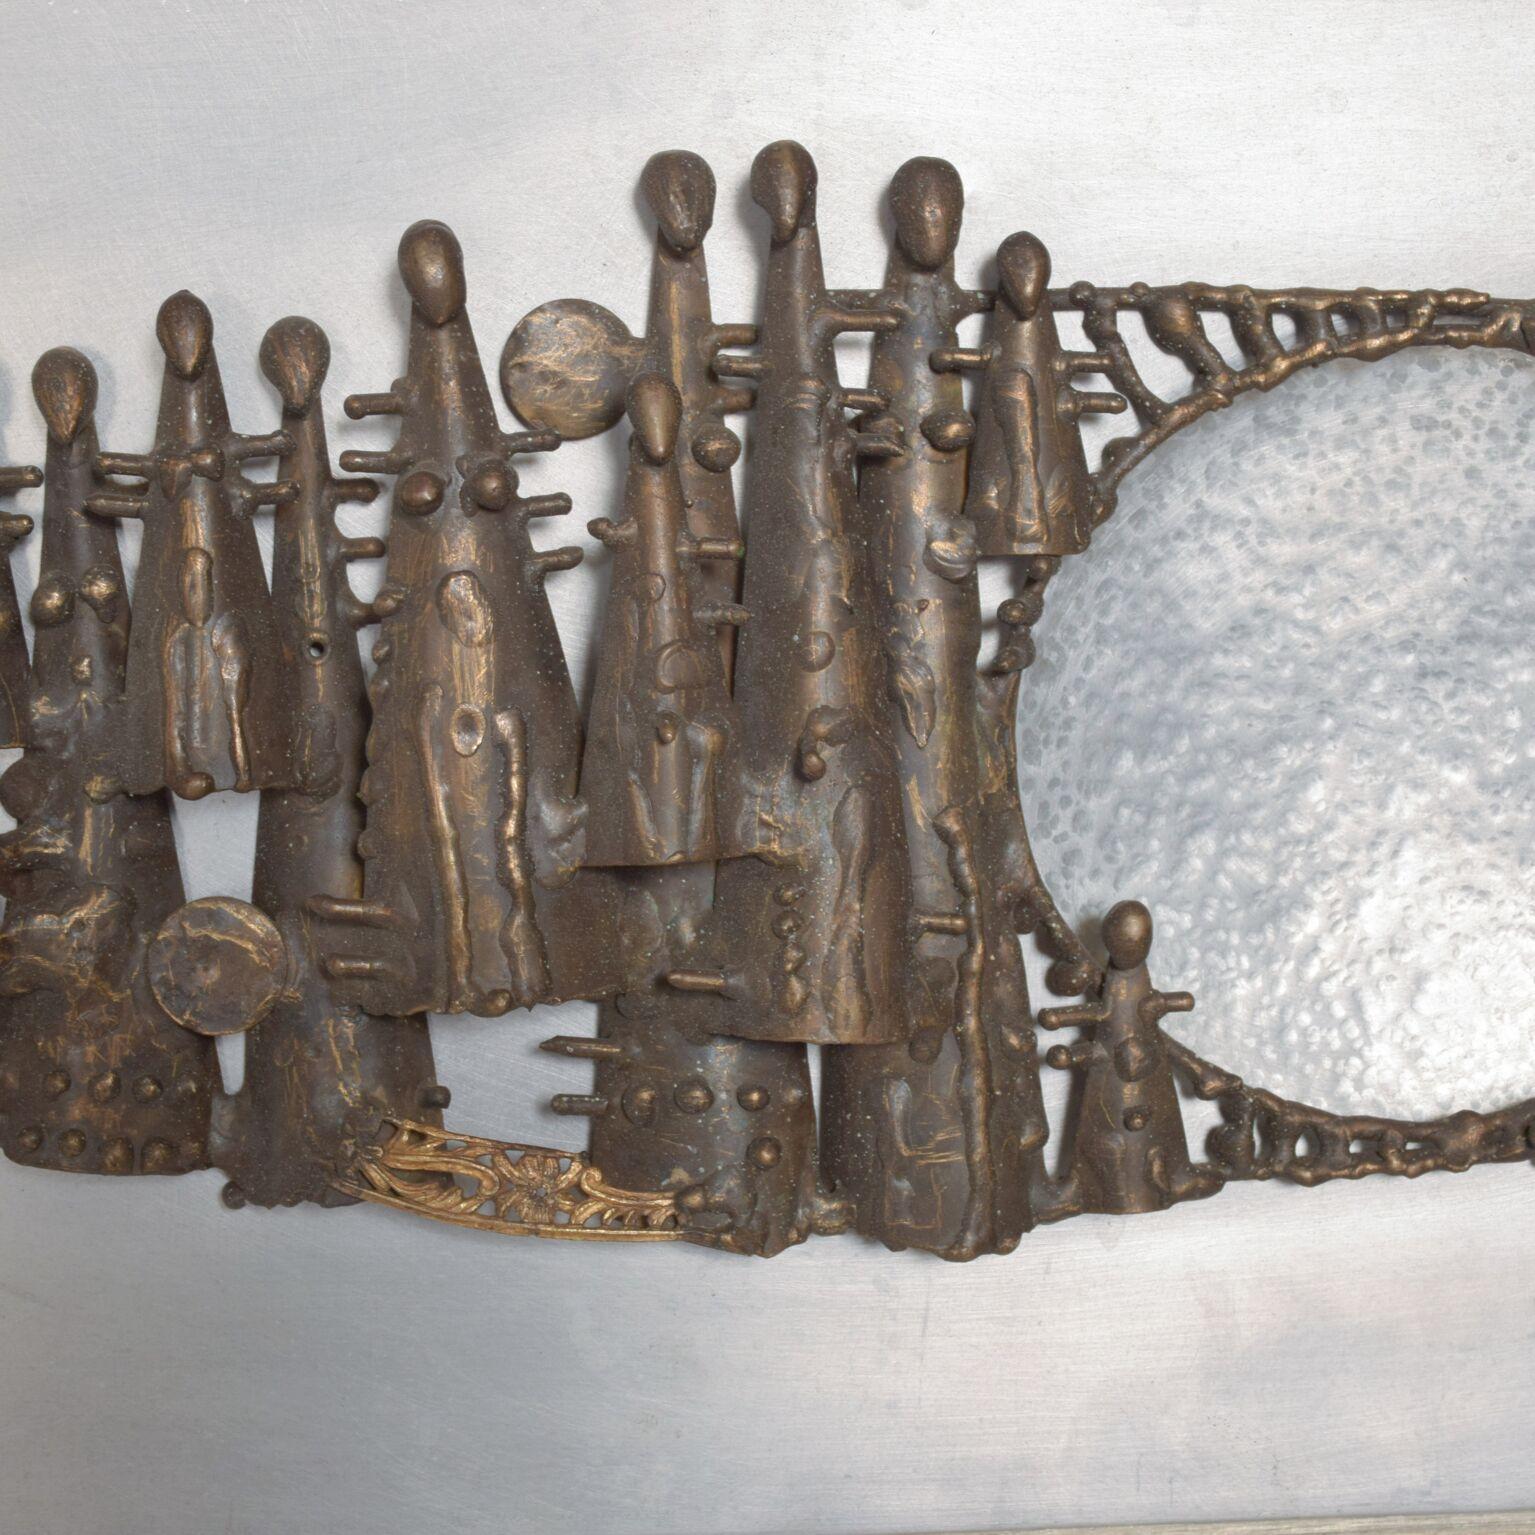 Wall Sculpture
1960s Mexican Modern Wall Art Abstract Sculpture with Figures crafted in Bronze and Glass.
13 3/4